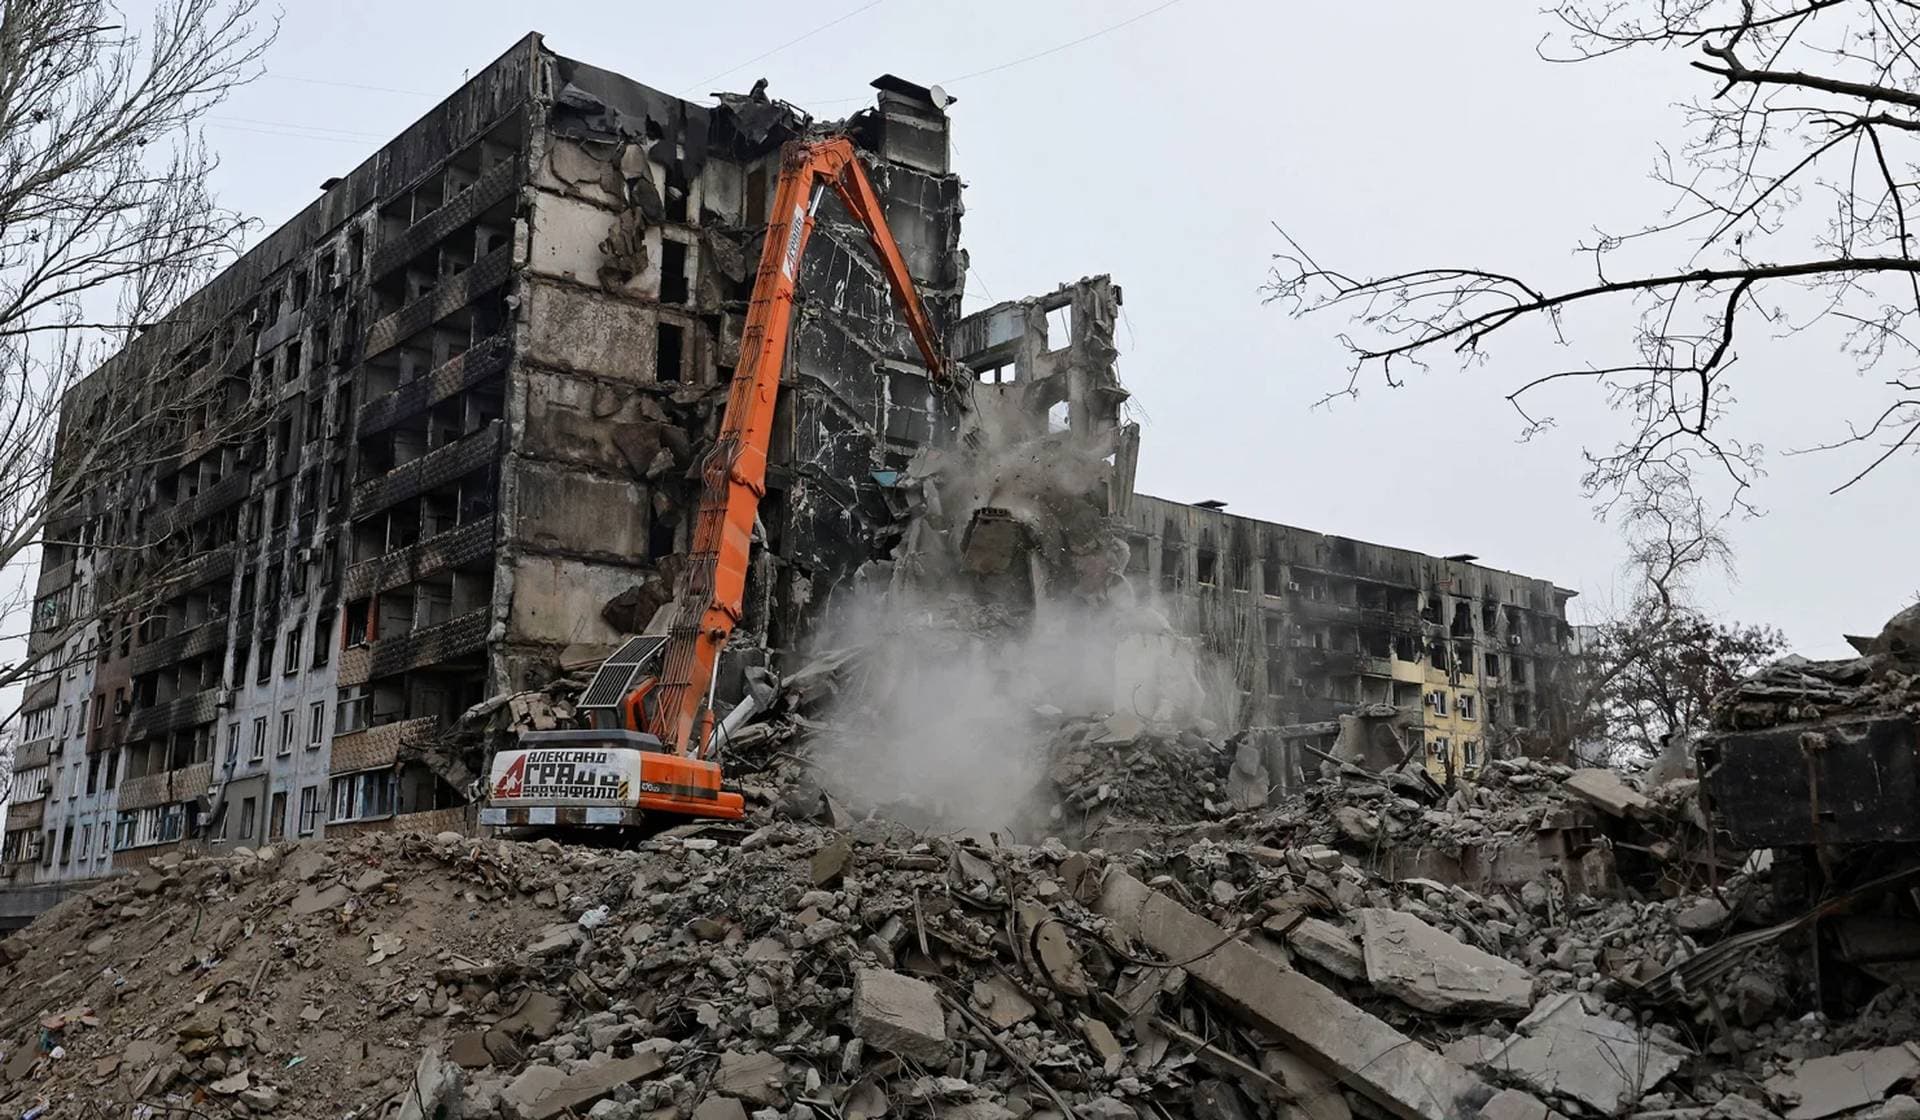 Workers demolish a multi-story apartment block which was destroyed in the course of Russia-Ukraine conflict in Mariupol